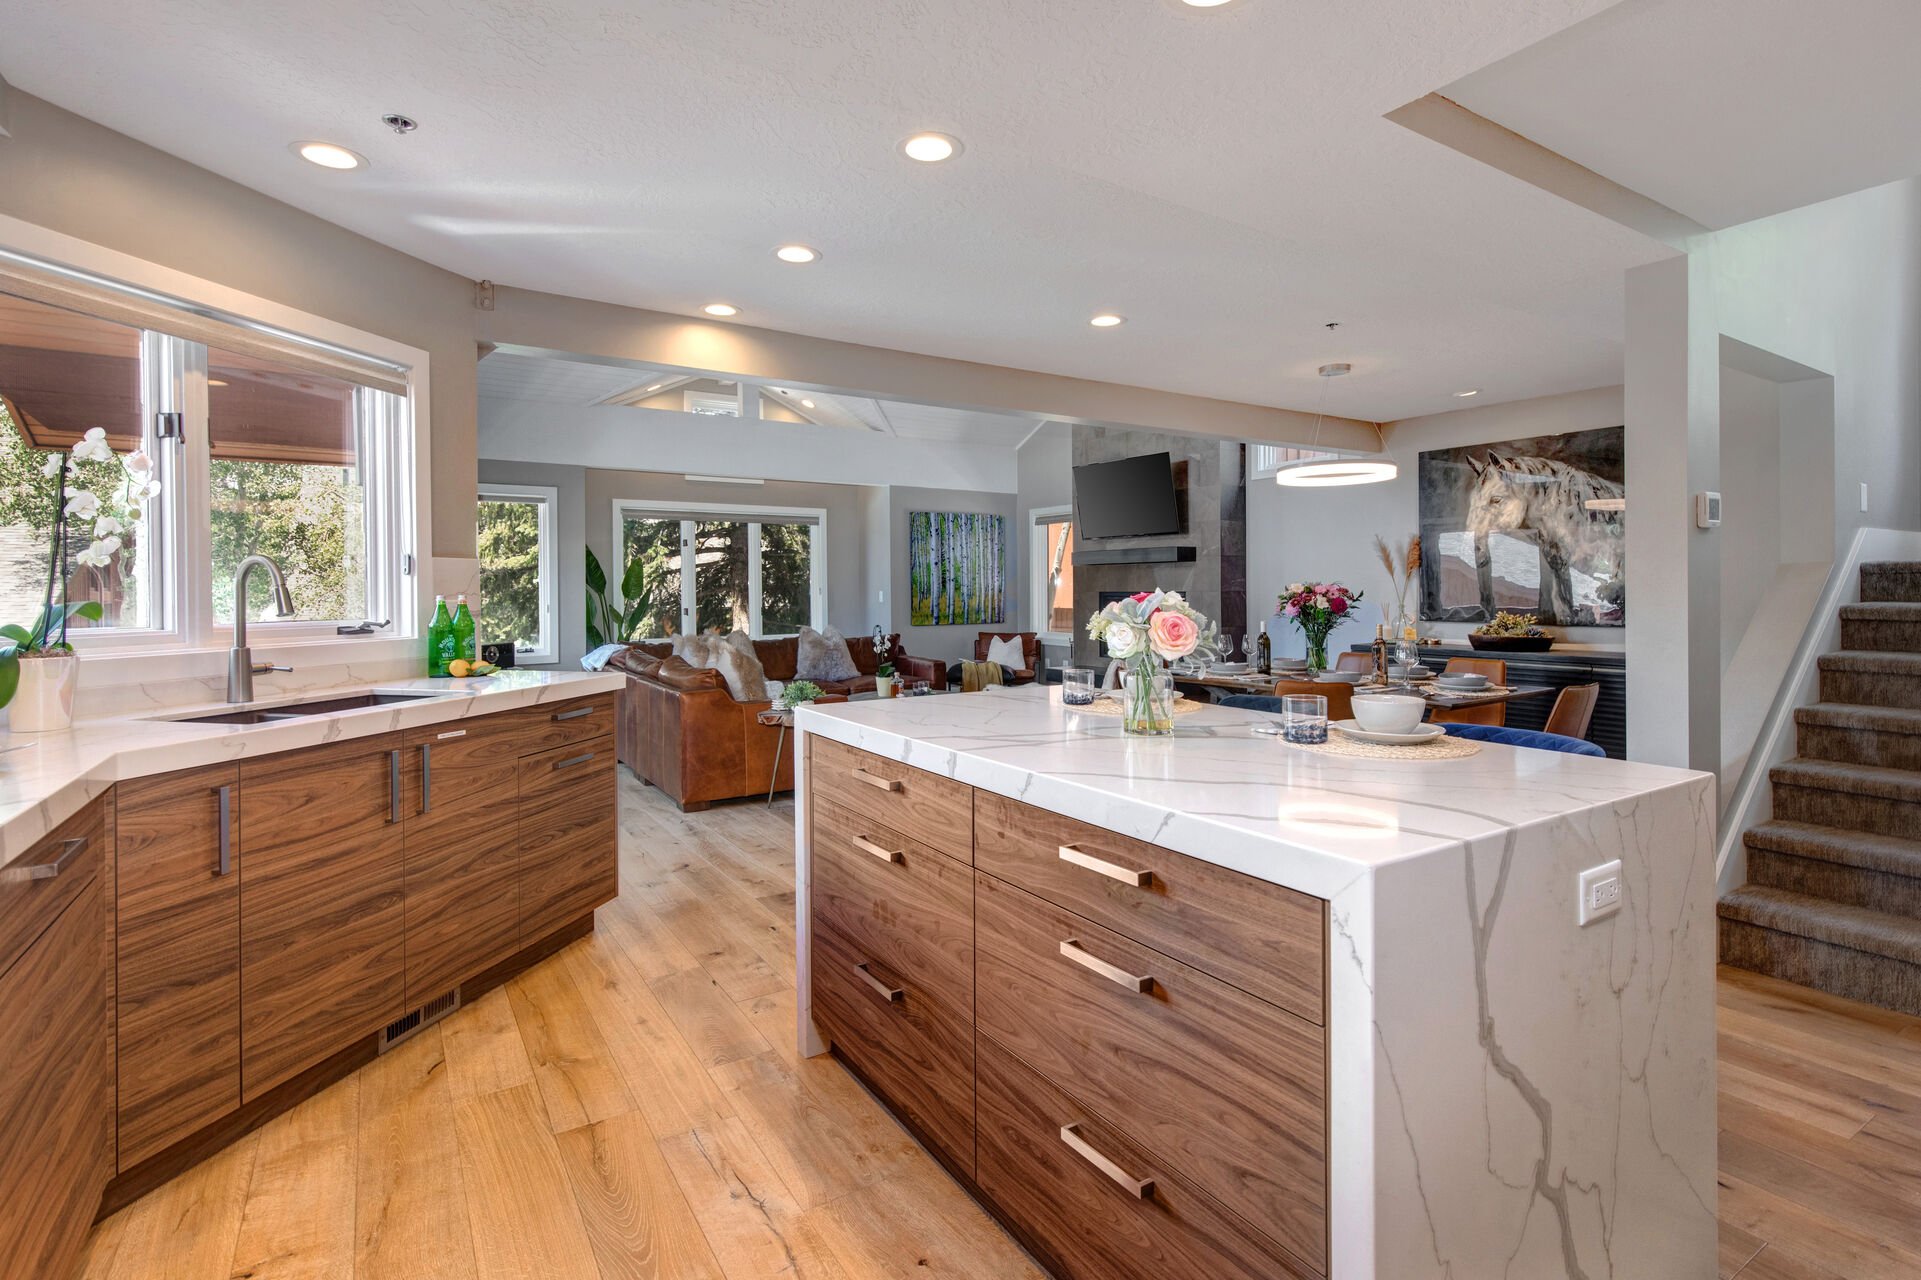 Gourmet Kitchen with a Center Island Seating and Beautiful Marbled Countertops